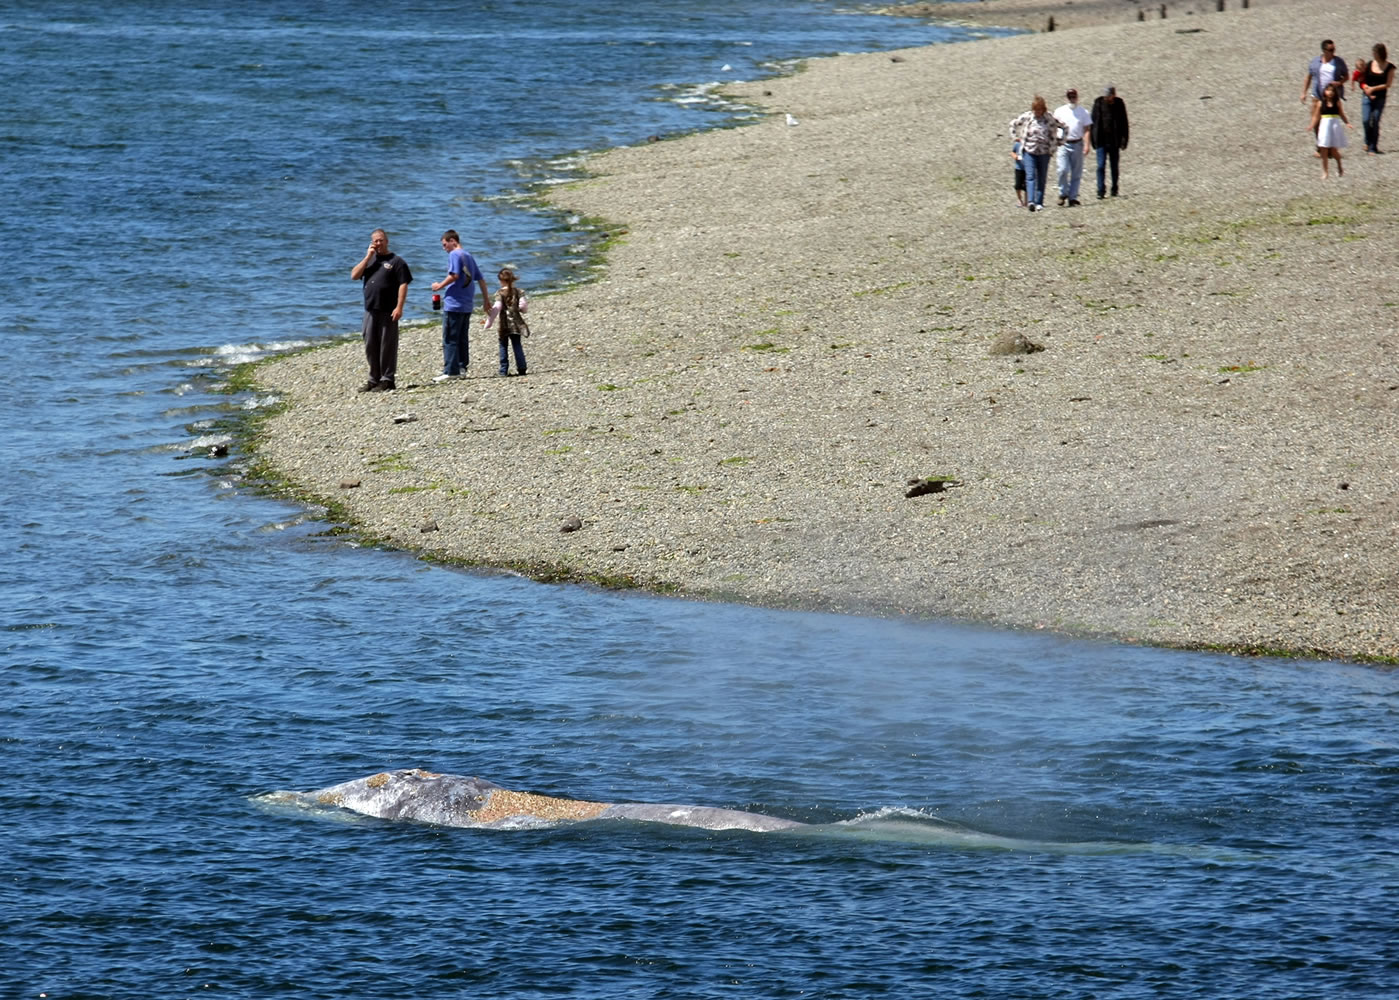 Whale watchers look from the beach at a gray whale near the Purdy Spit Bridge in Olalla on Wednesday.